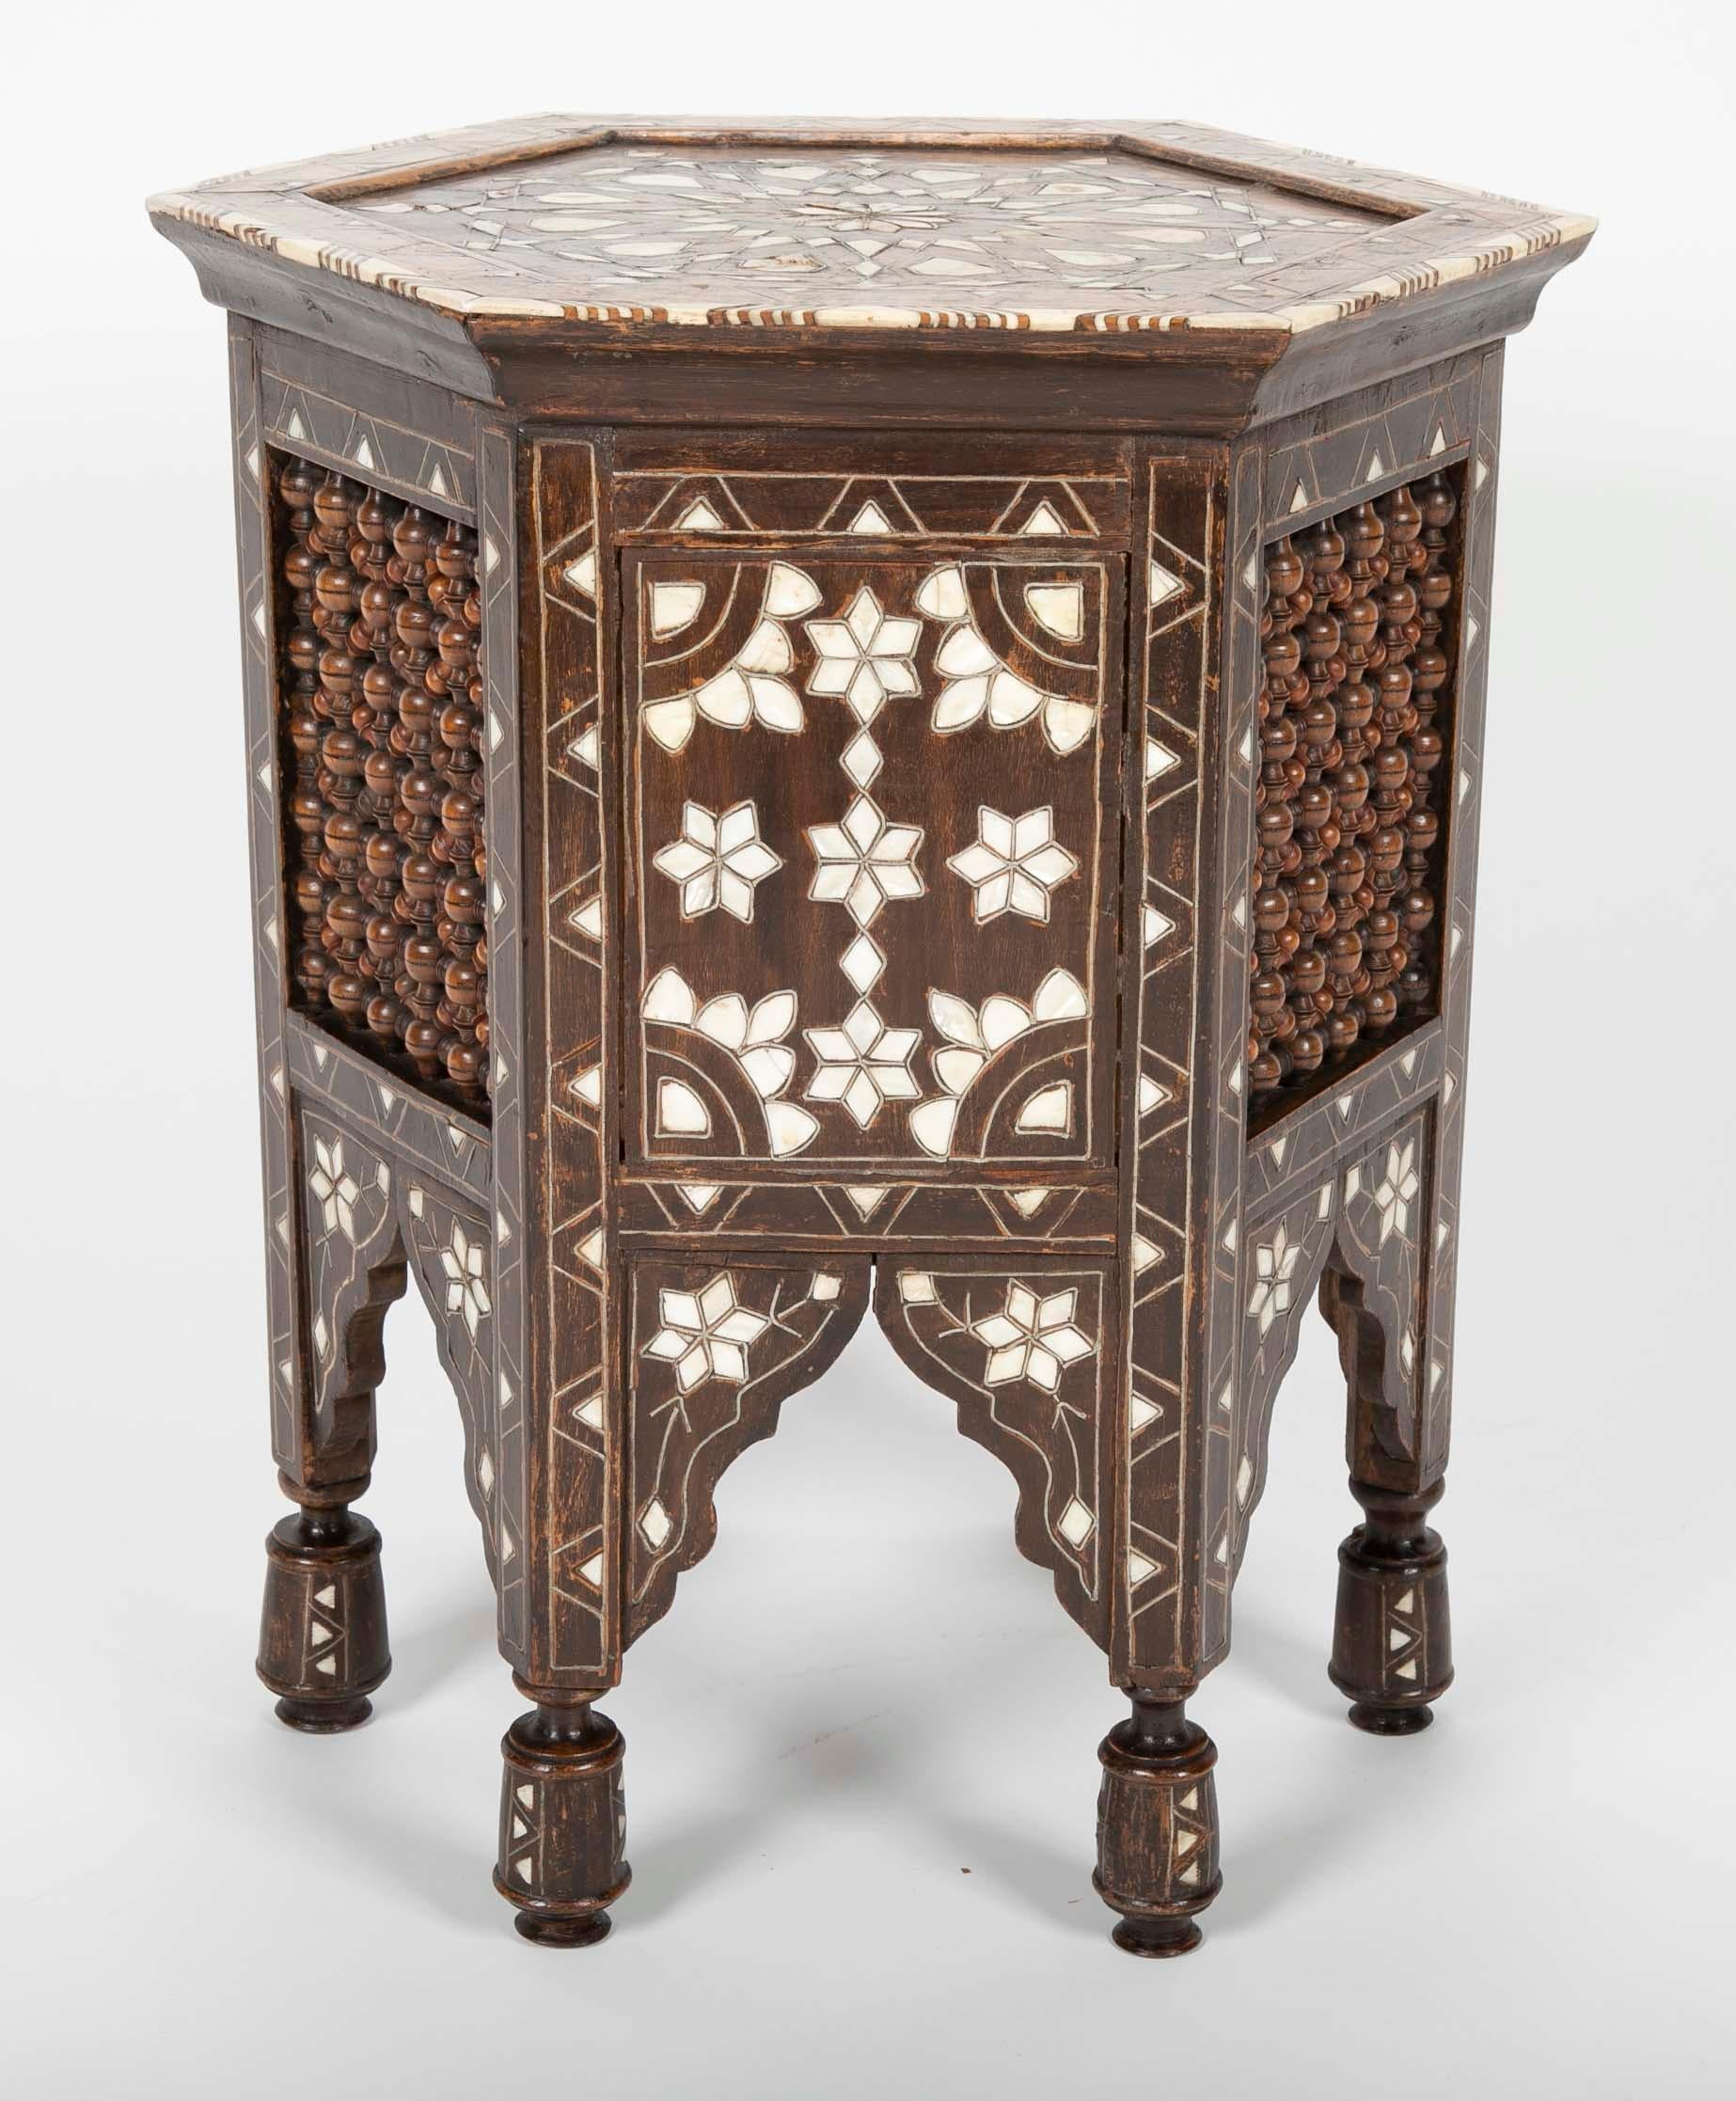 19th Century Ottoman Mother-of-Pearl and Bone Inlaid Side Table